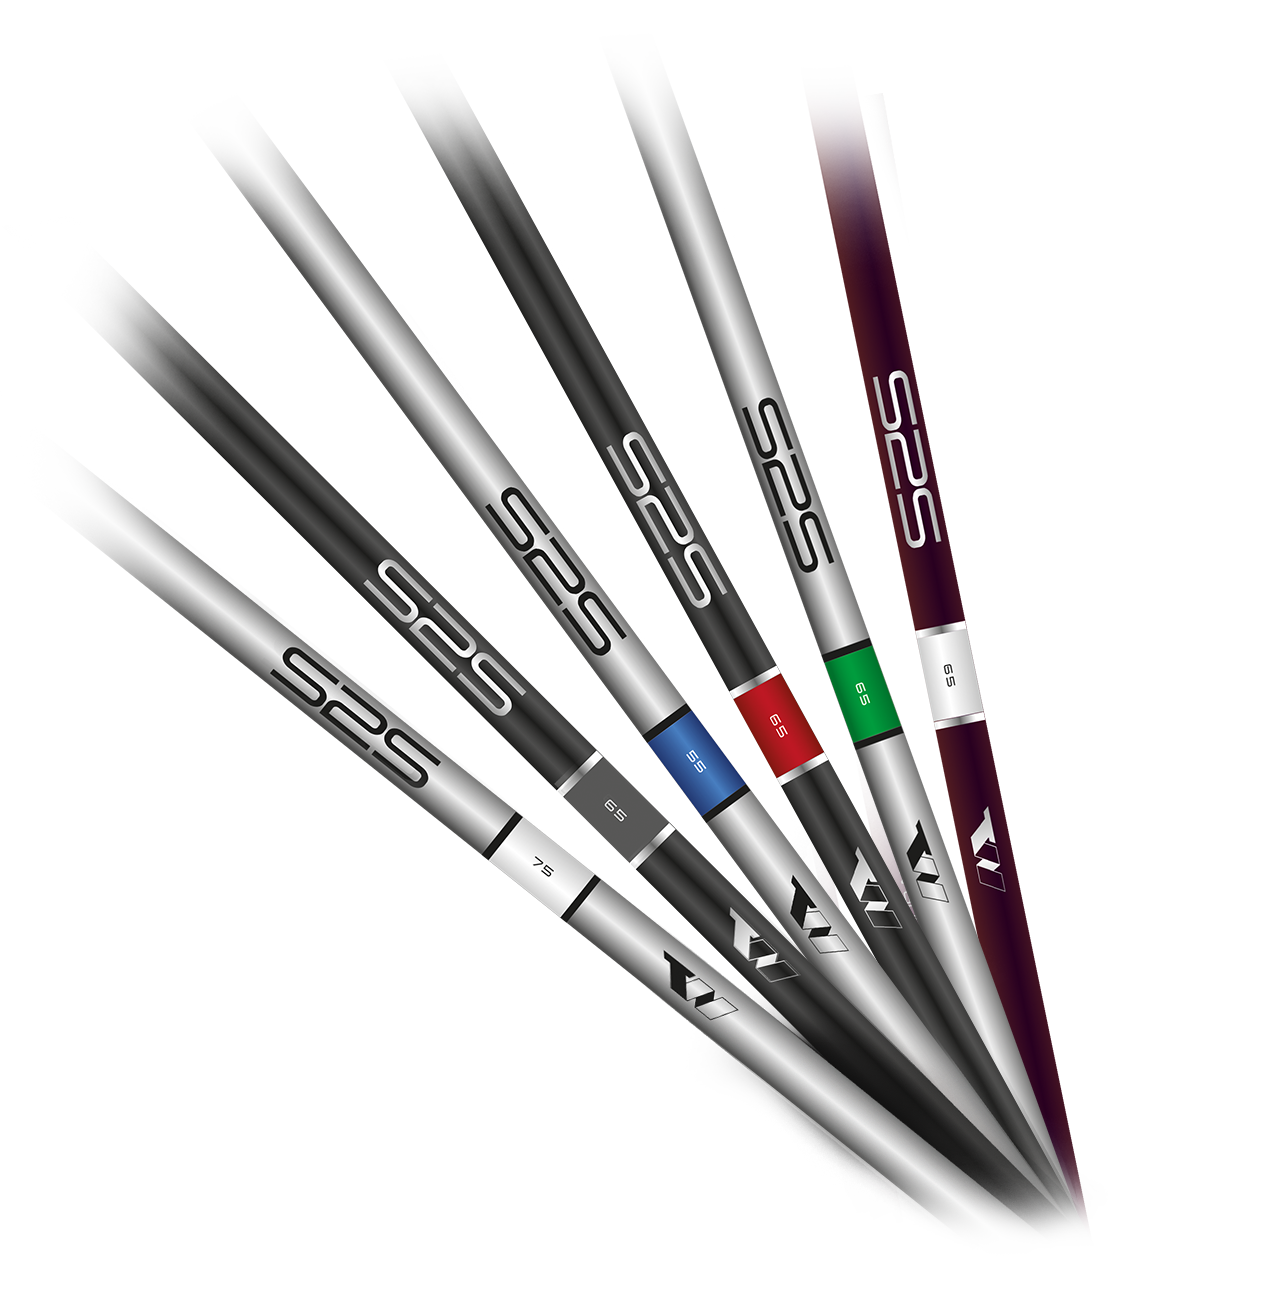 Why should I play graphite iron shafts?